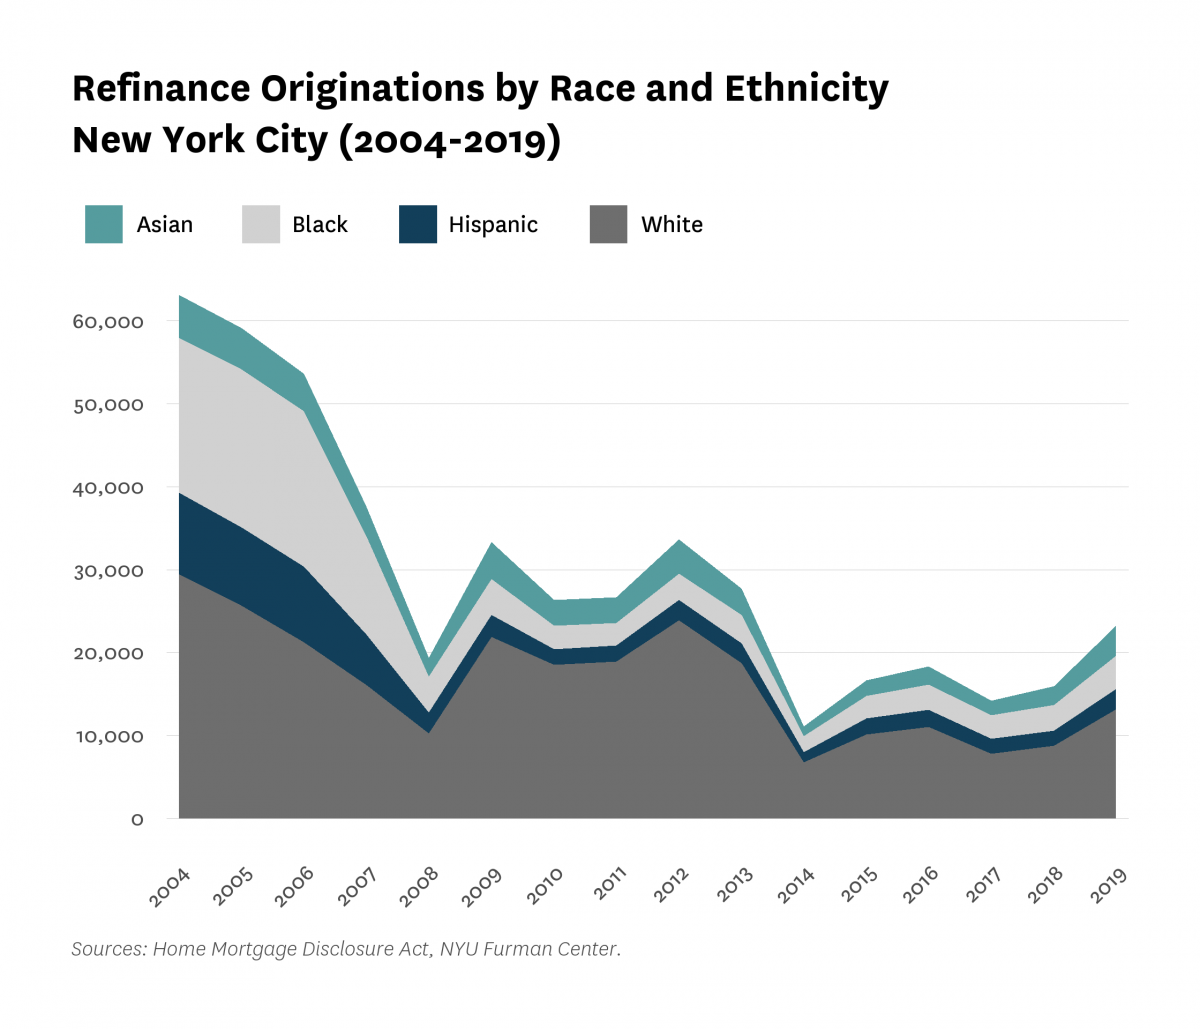 Area chart showing refinance originations by race and ethnicity in New York City from 2004 to 2019.